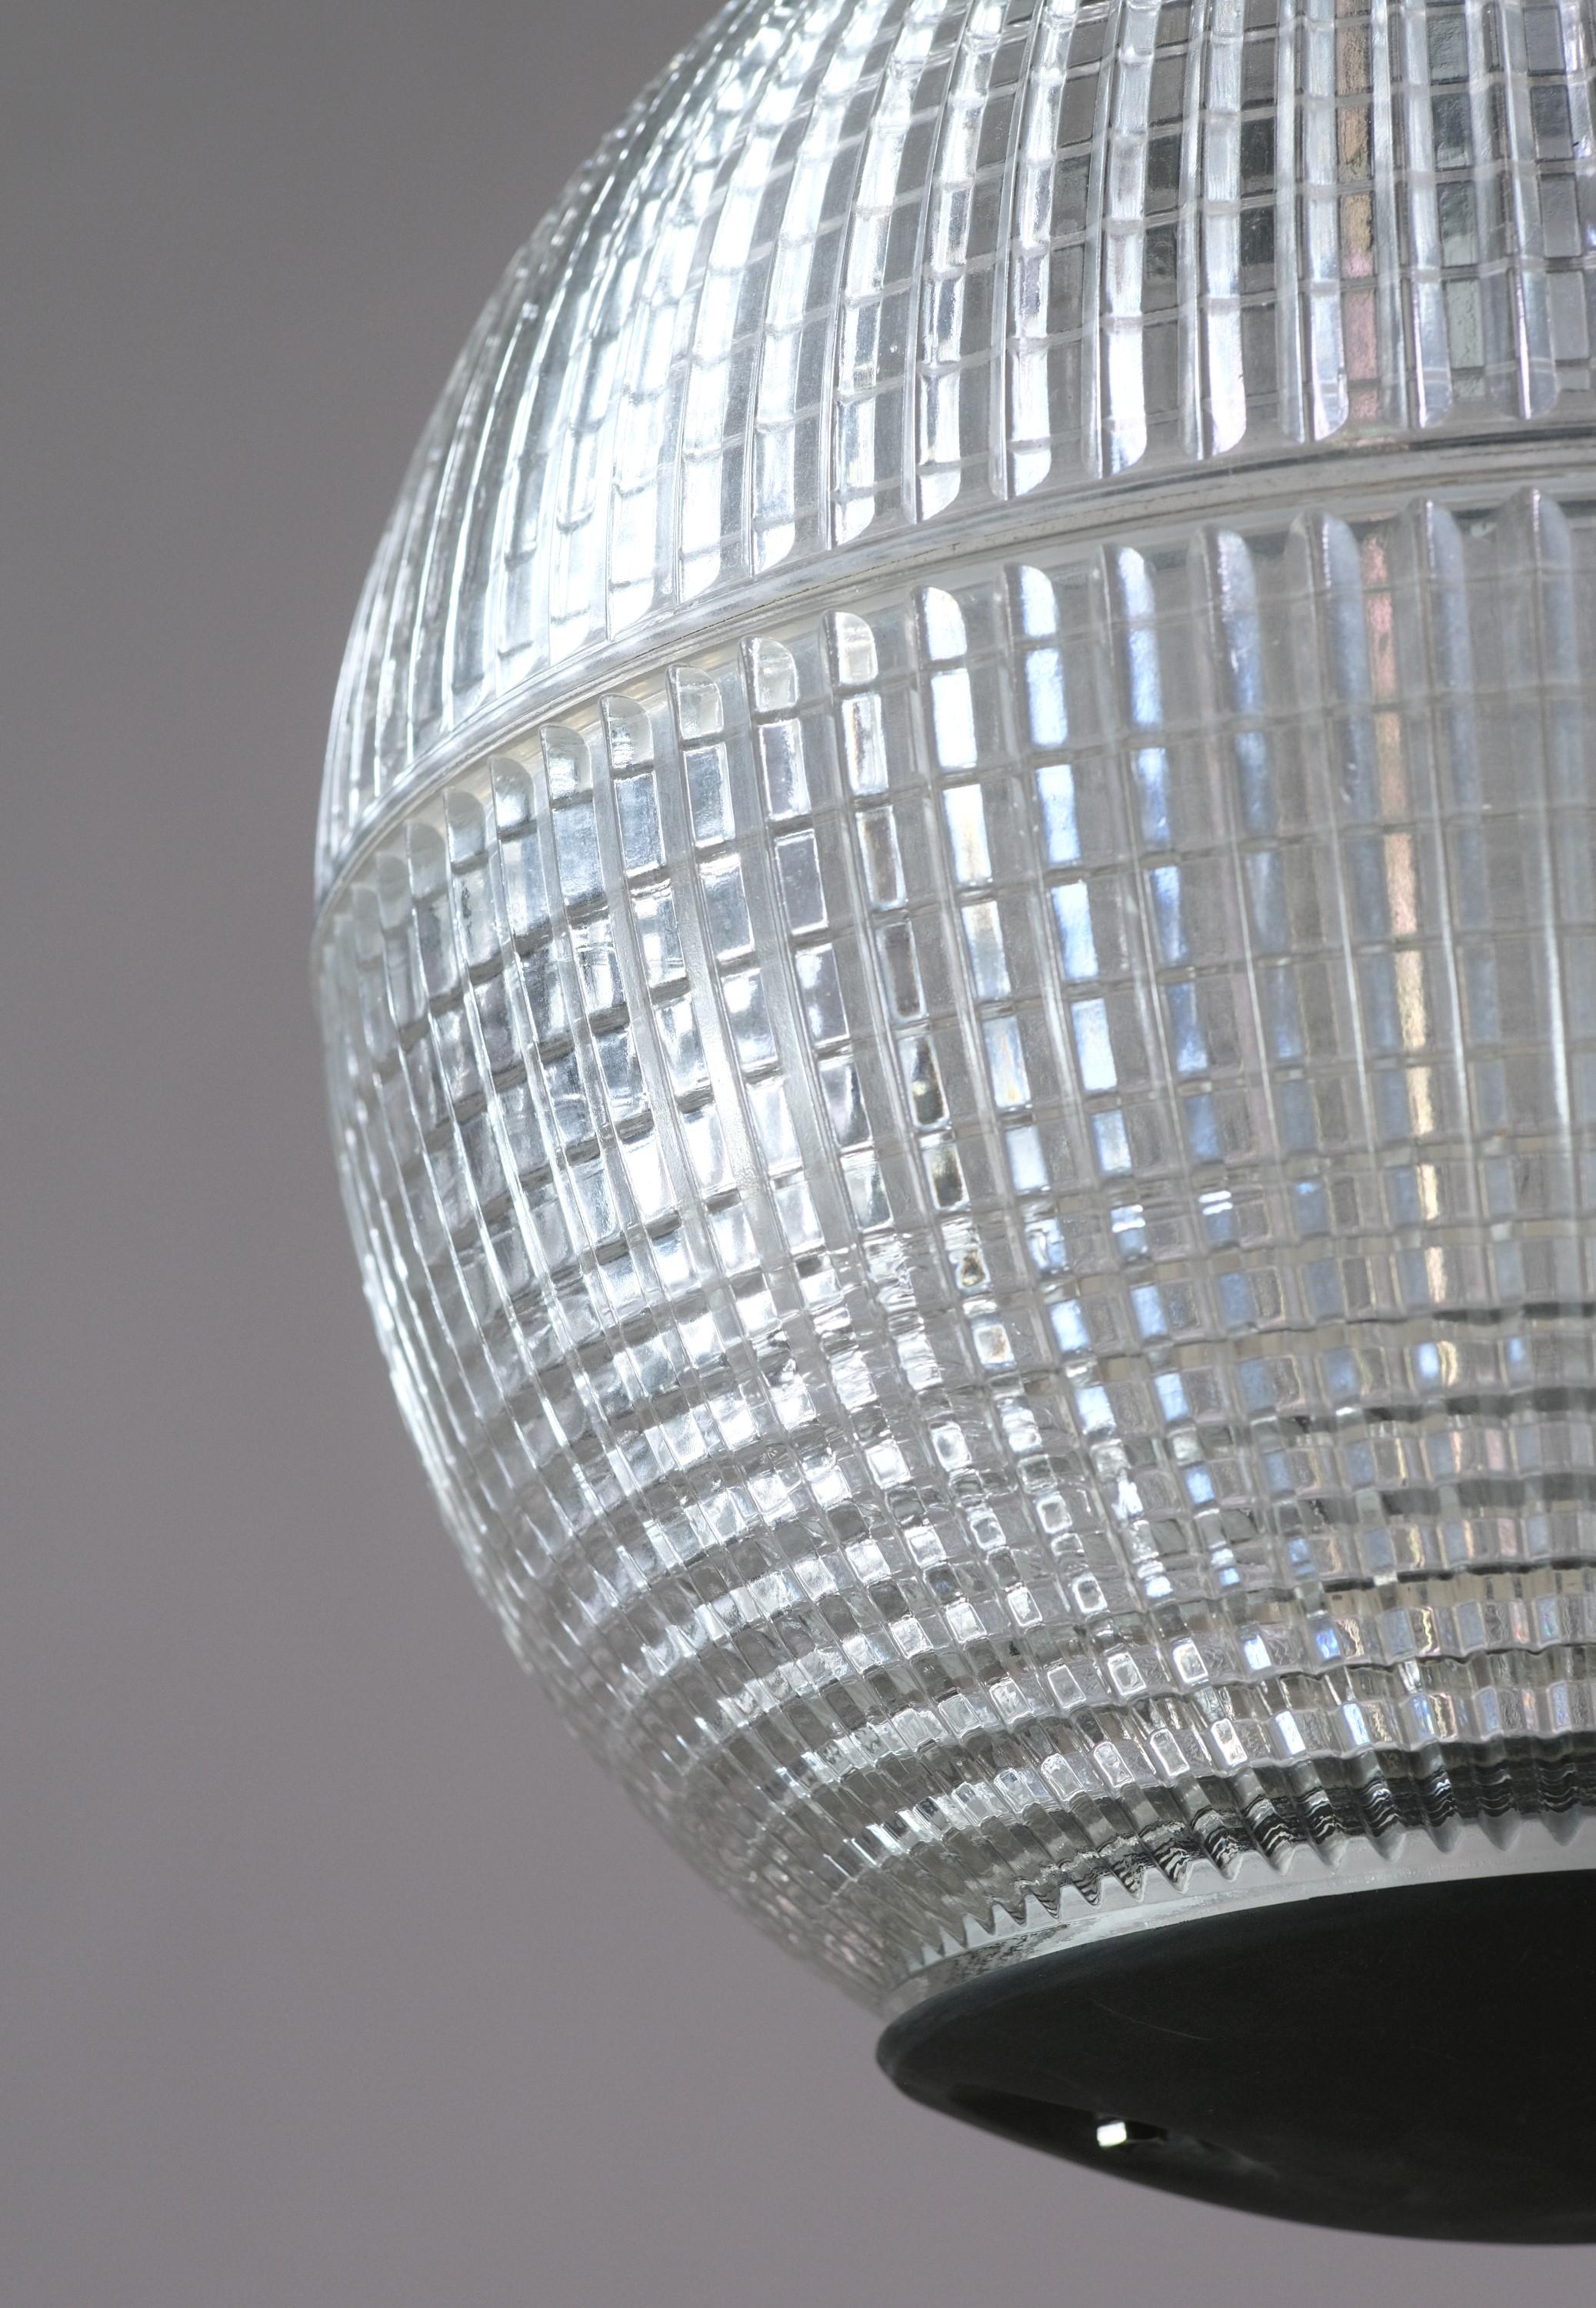 Mid-20th Century 1960s French Holophane Pendant Street Light Reeded Glass Rewired for US